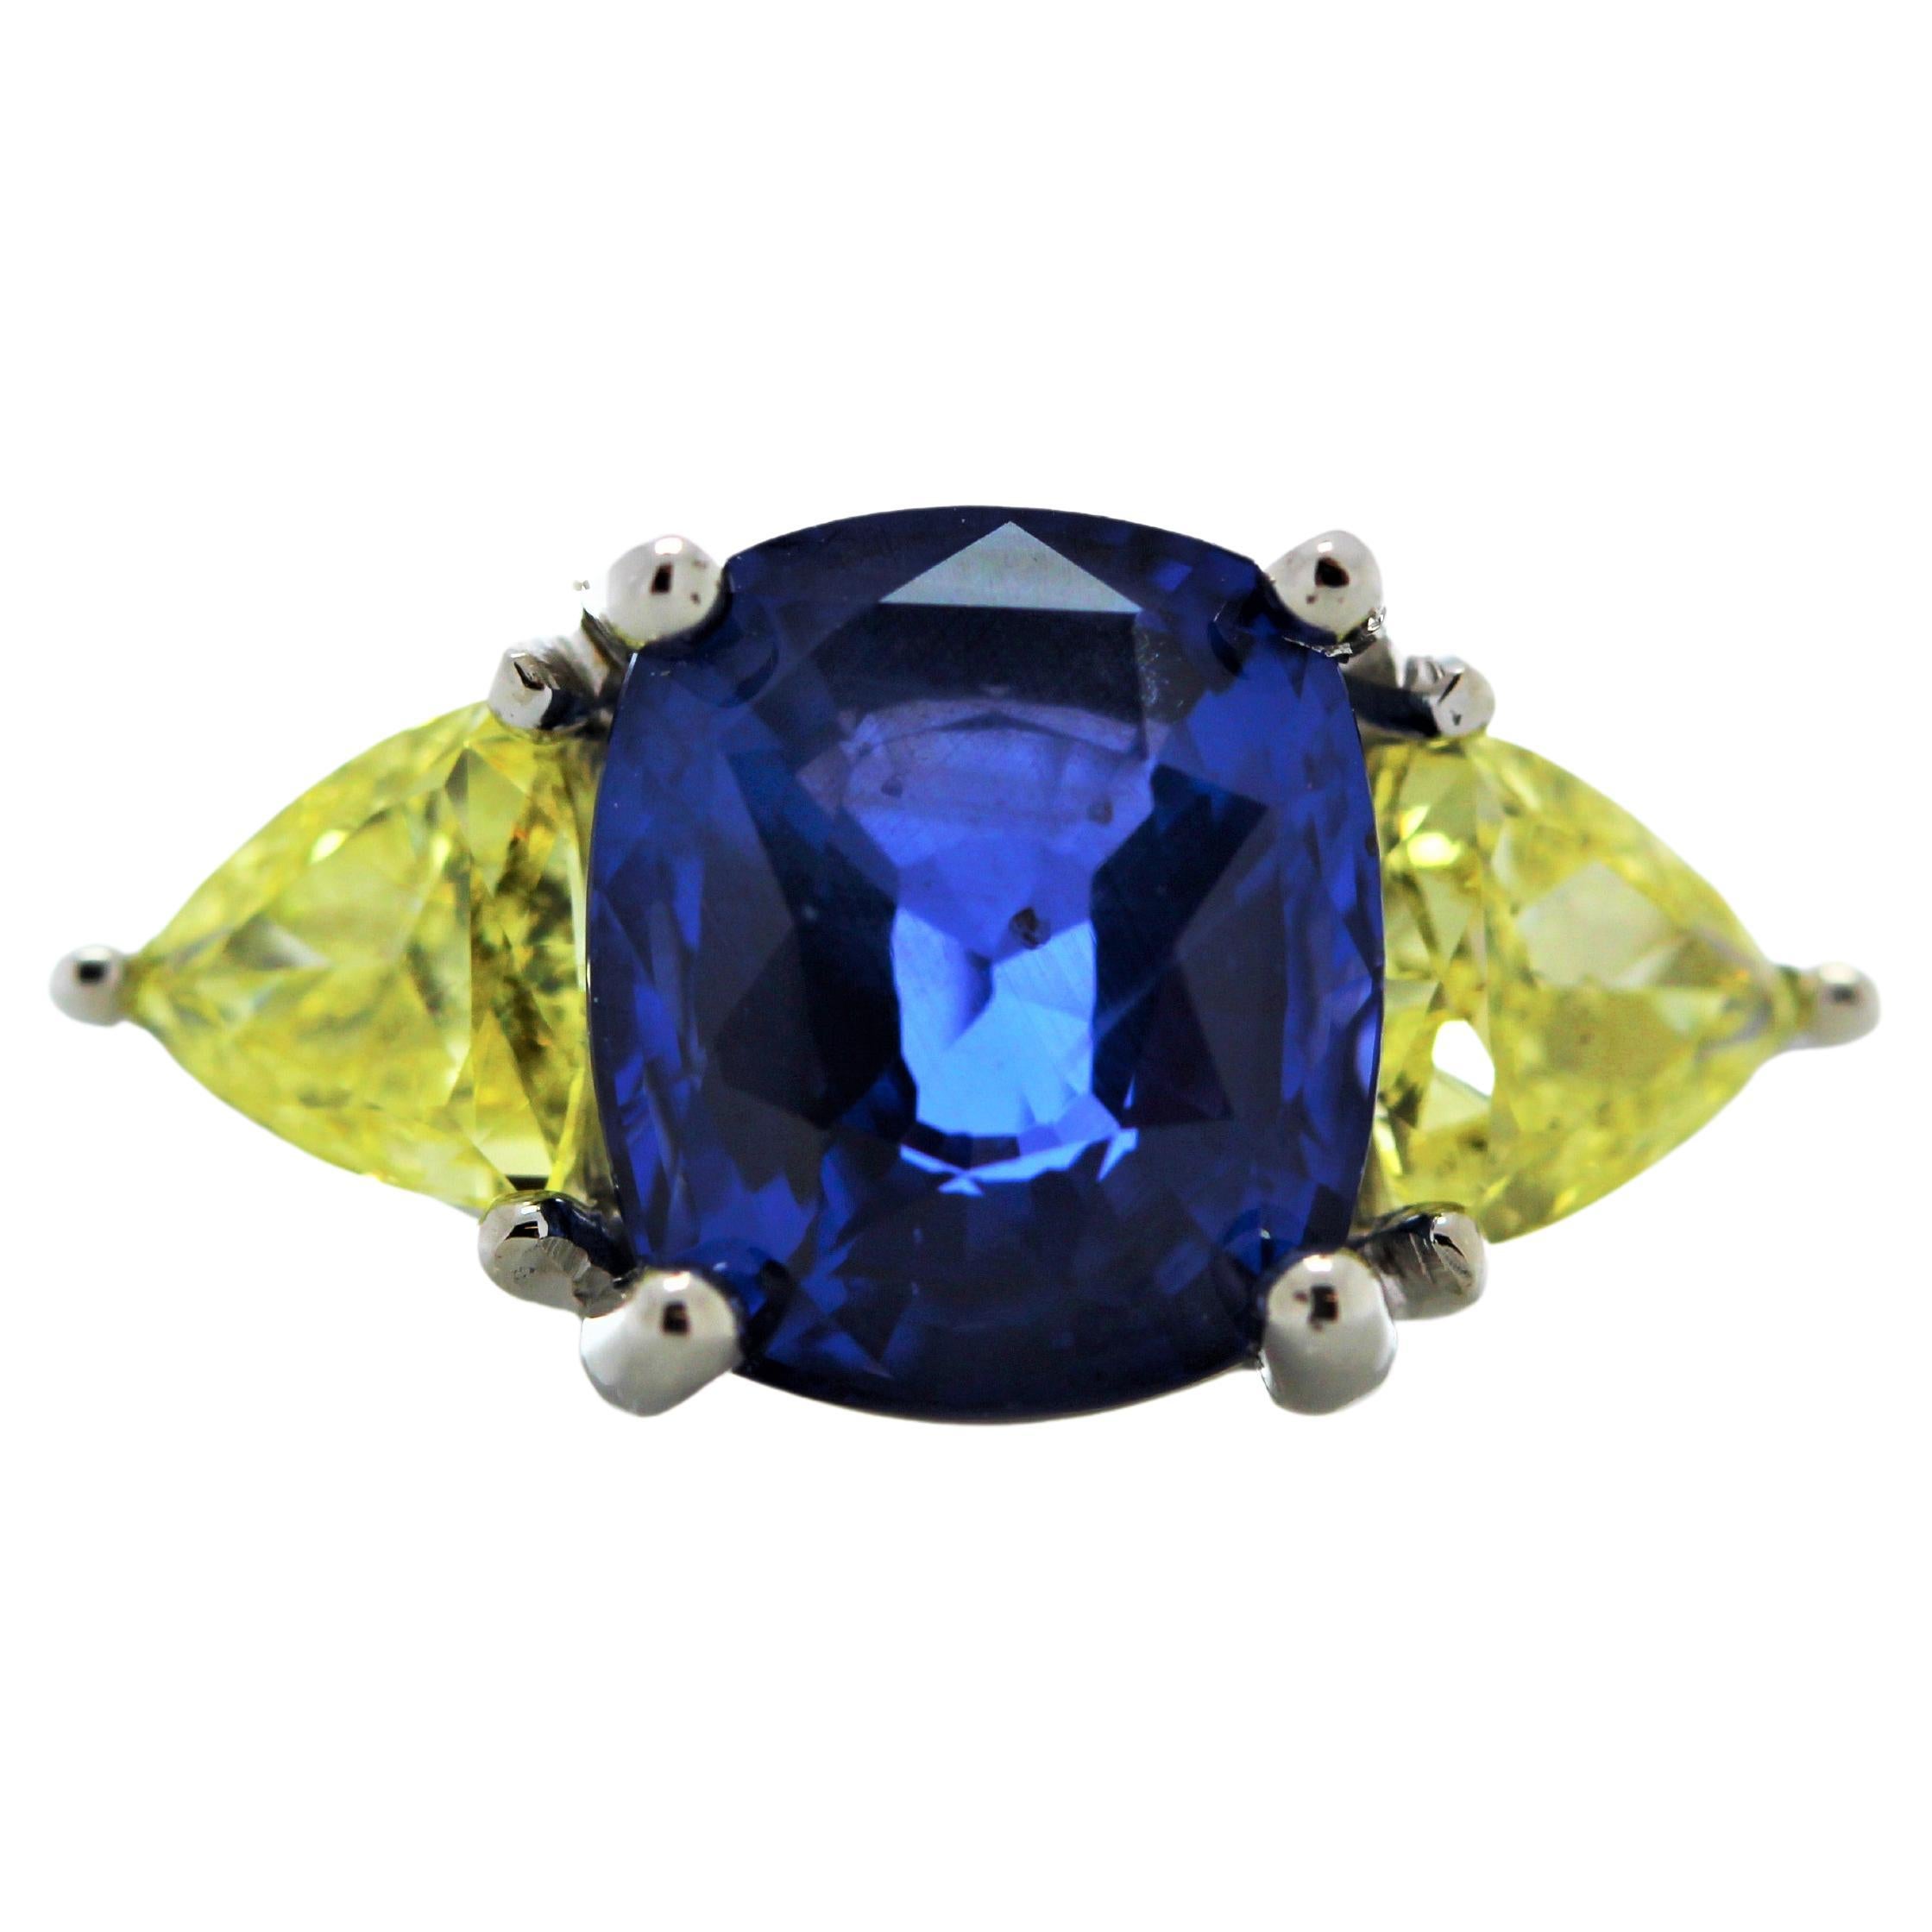 4.27CT Blue Sapphire and .92CTW Diamond Ring in 18K White Gold